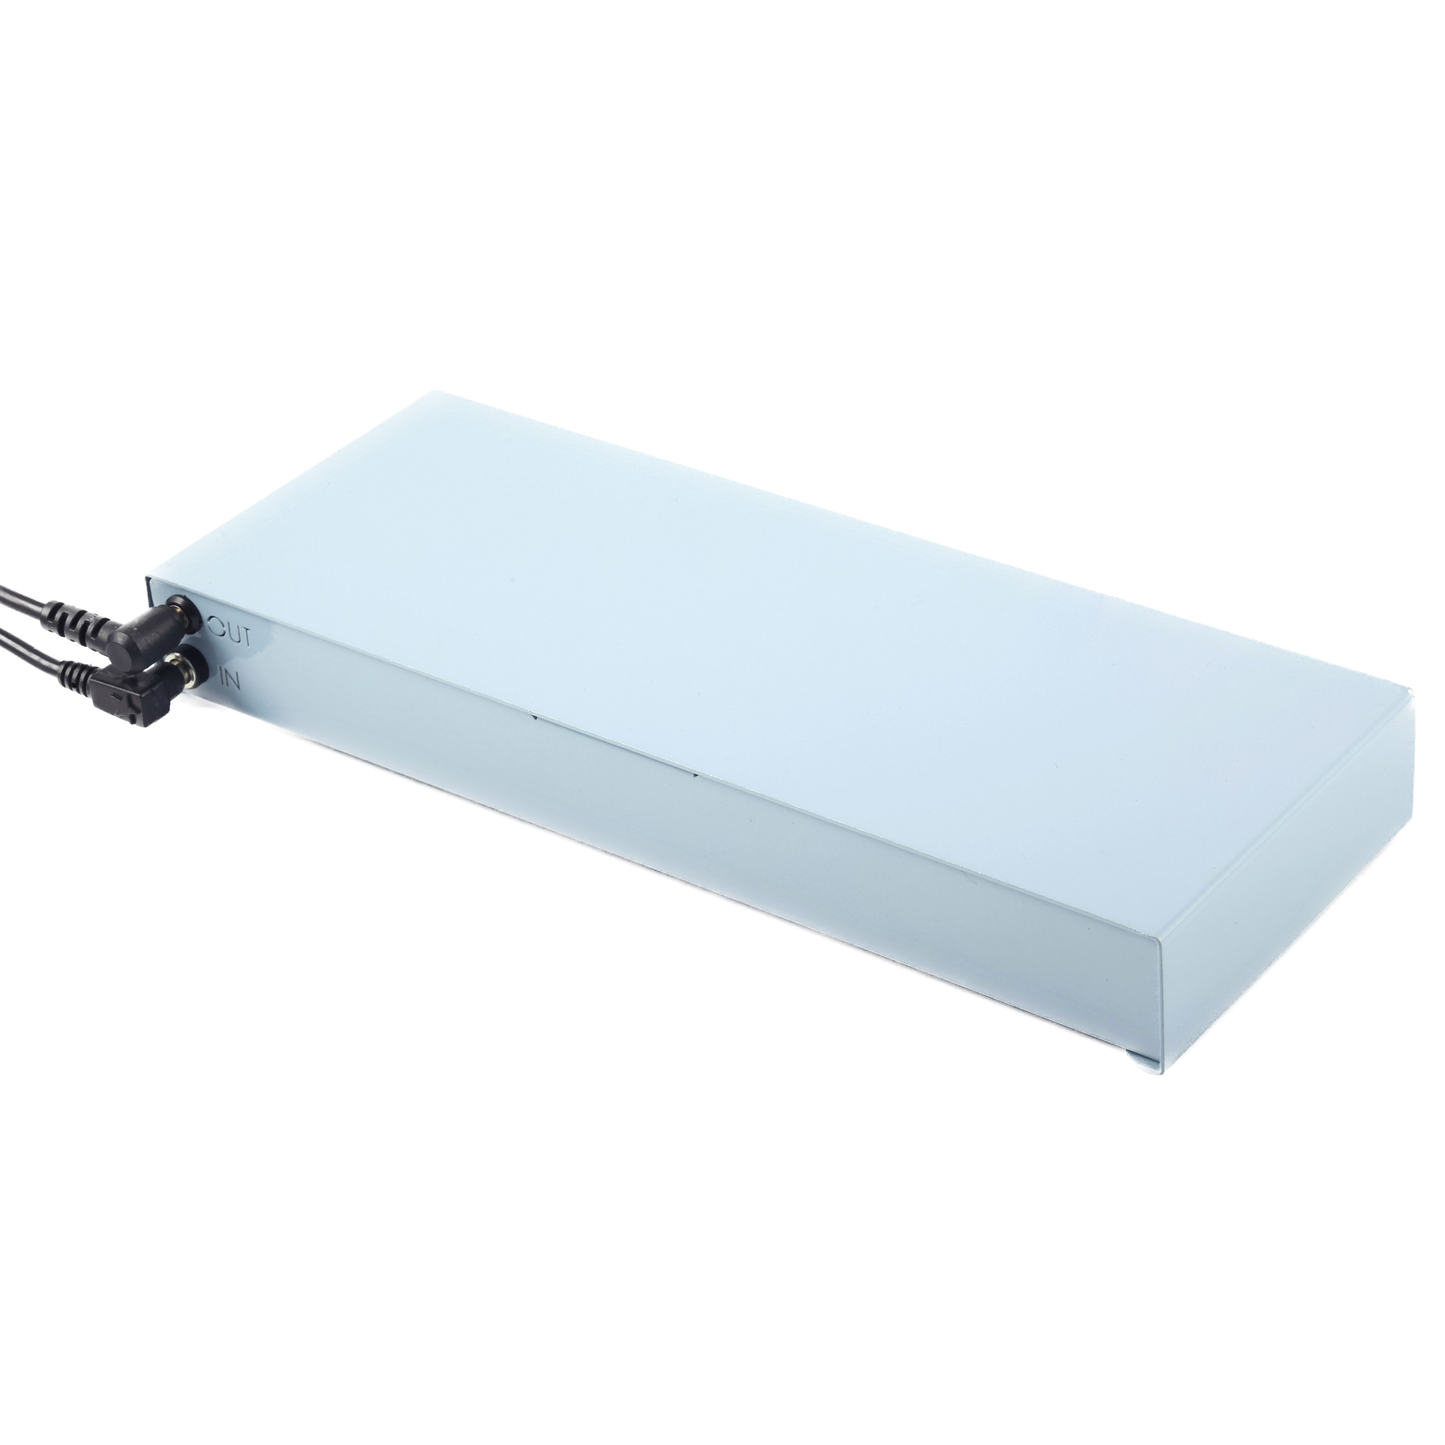 Li-Ion Power Bank for Barrel/Square Laptops (65W) - Includes 12 laptop pins